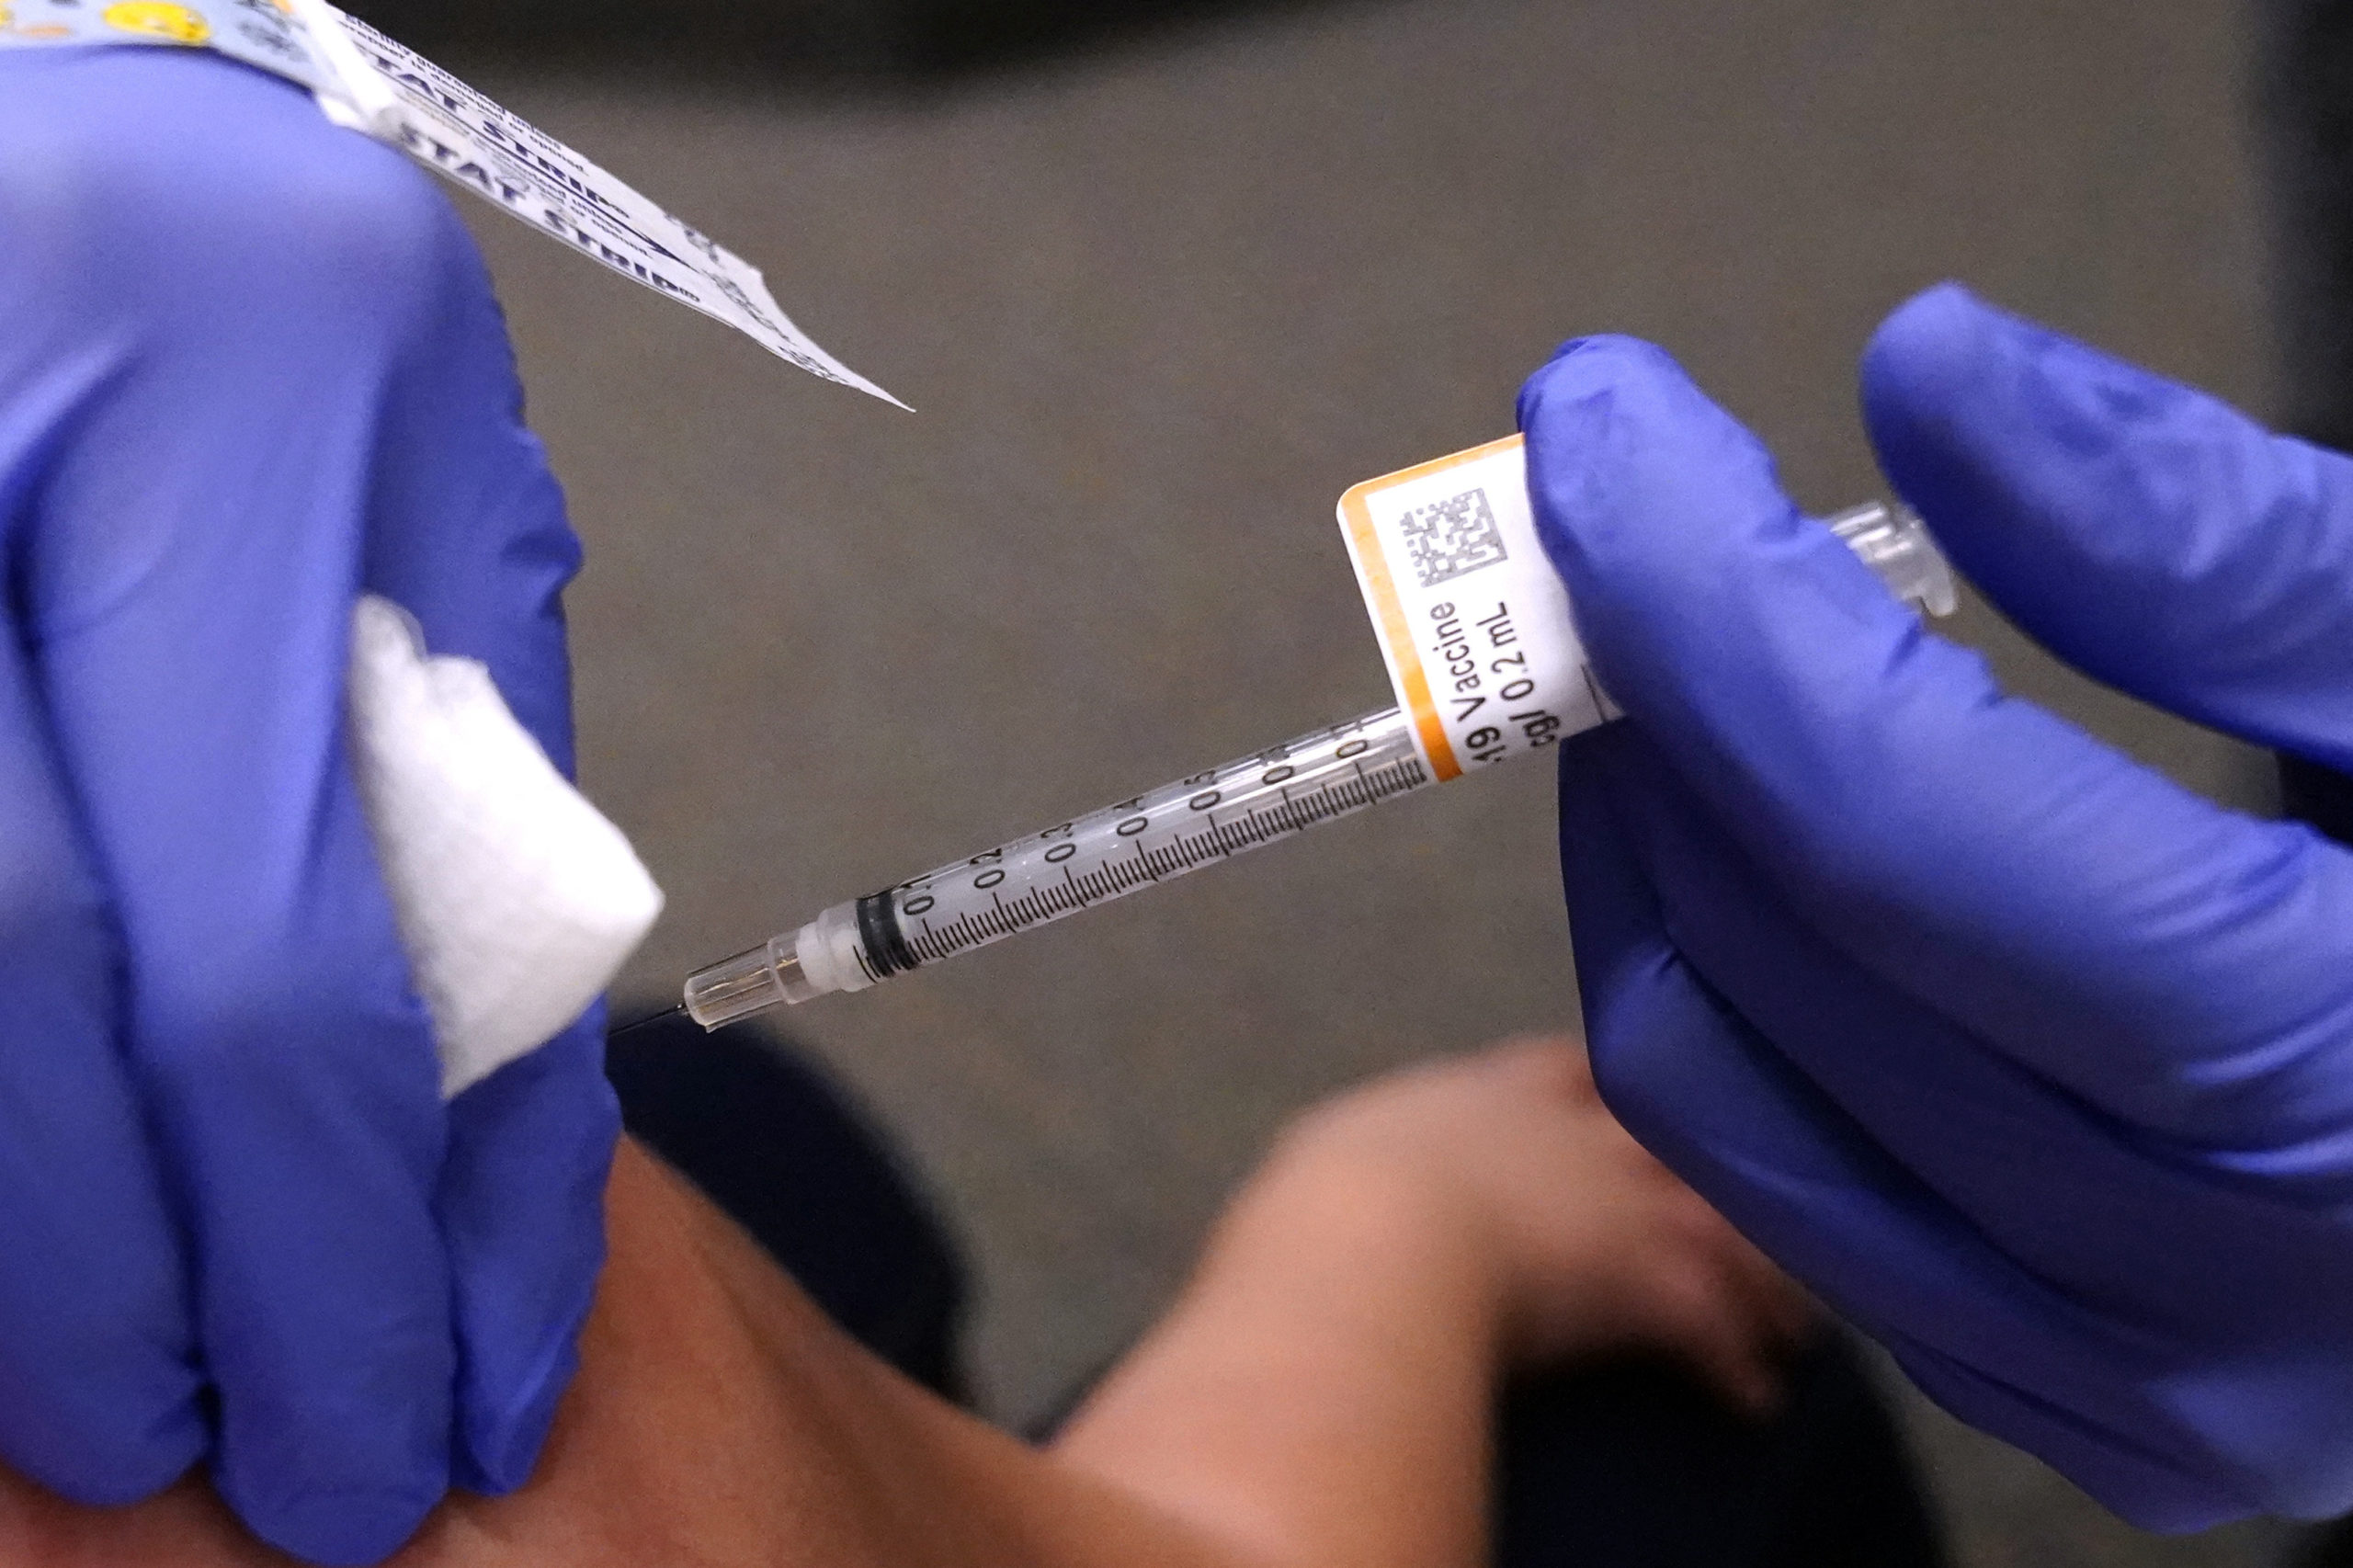 An 8-year-old child receives a second dose of the Pfizer COVID-19 vaccine at Northwest Community Church in Chicago on Saturday.